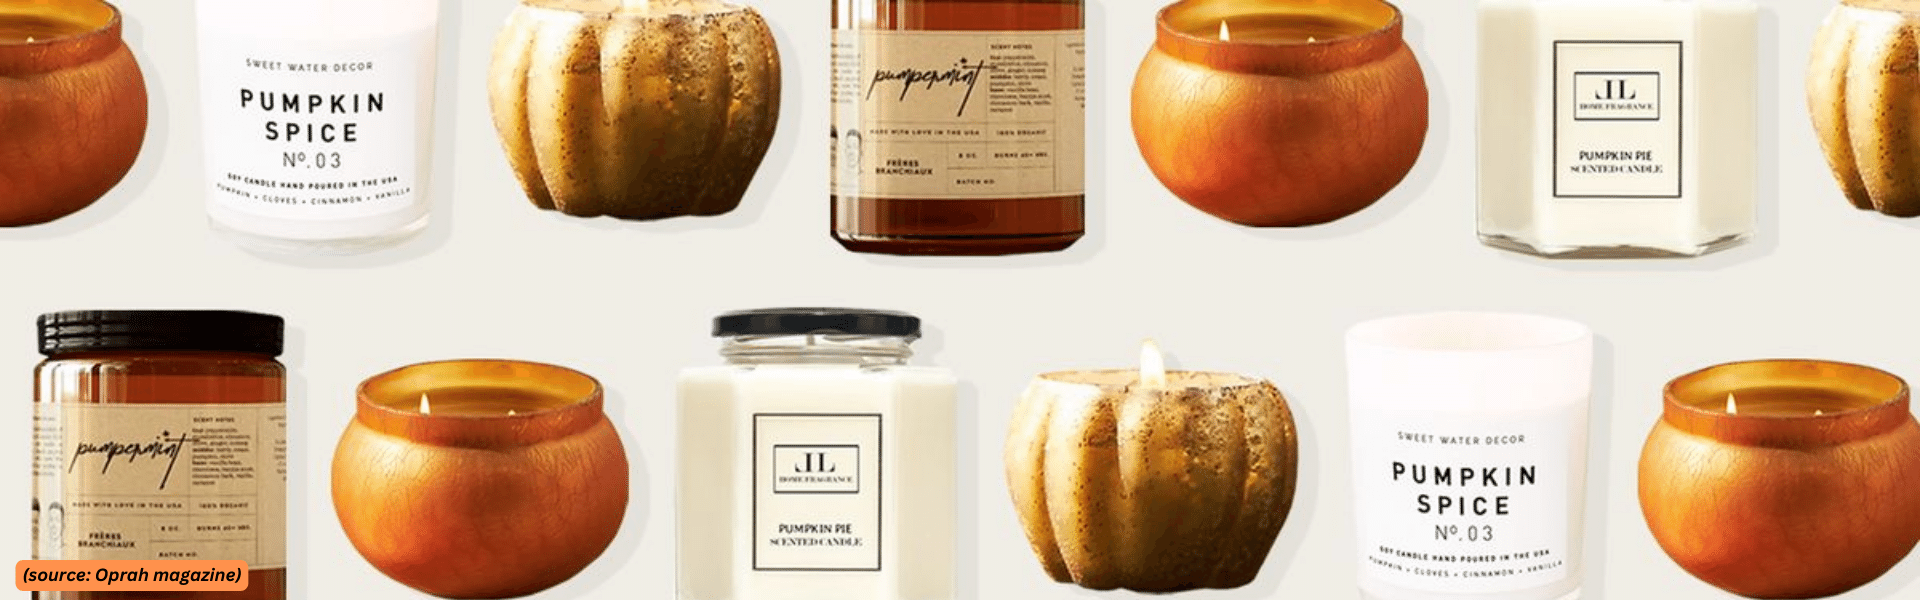 are pumpkin candles and soaps still popular